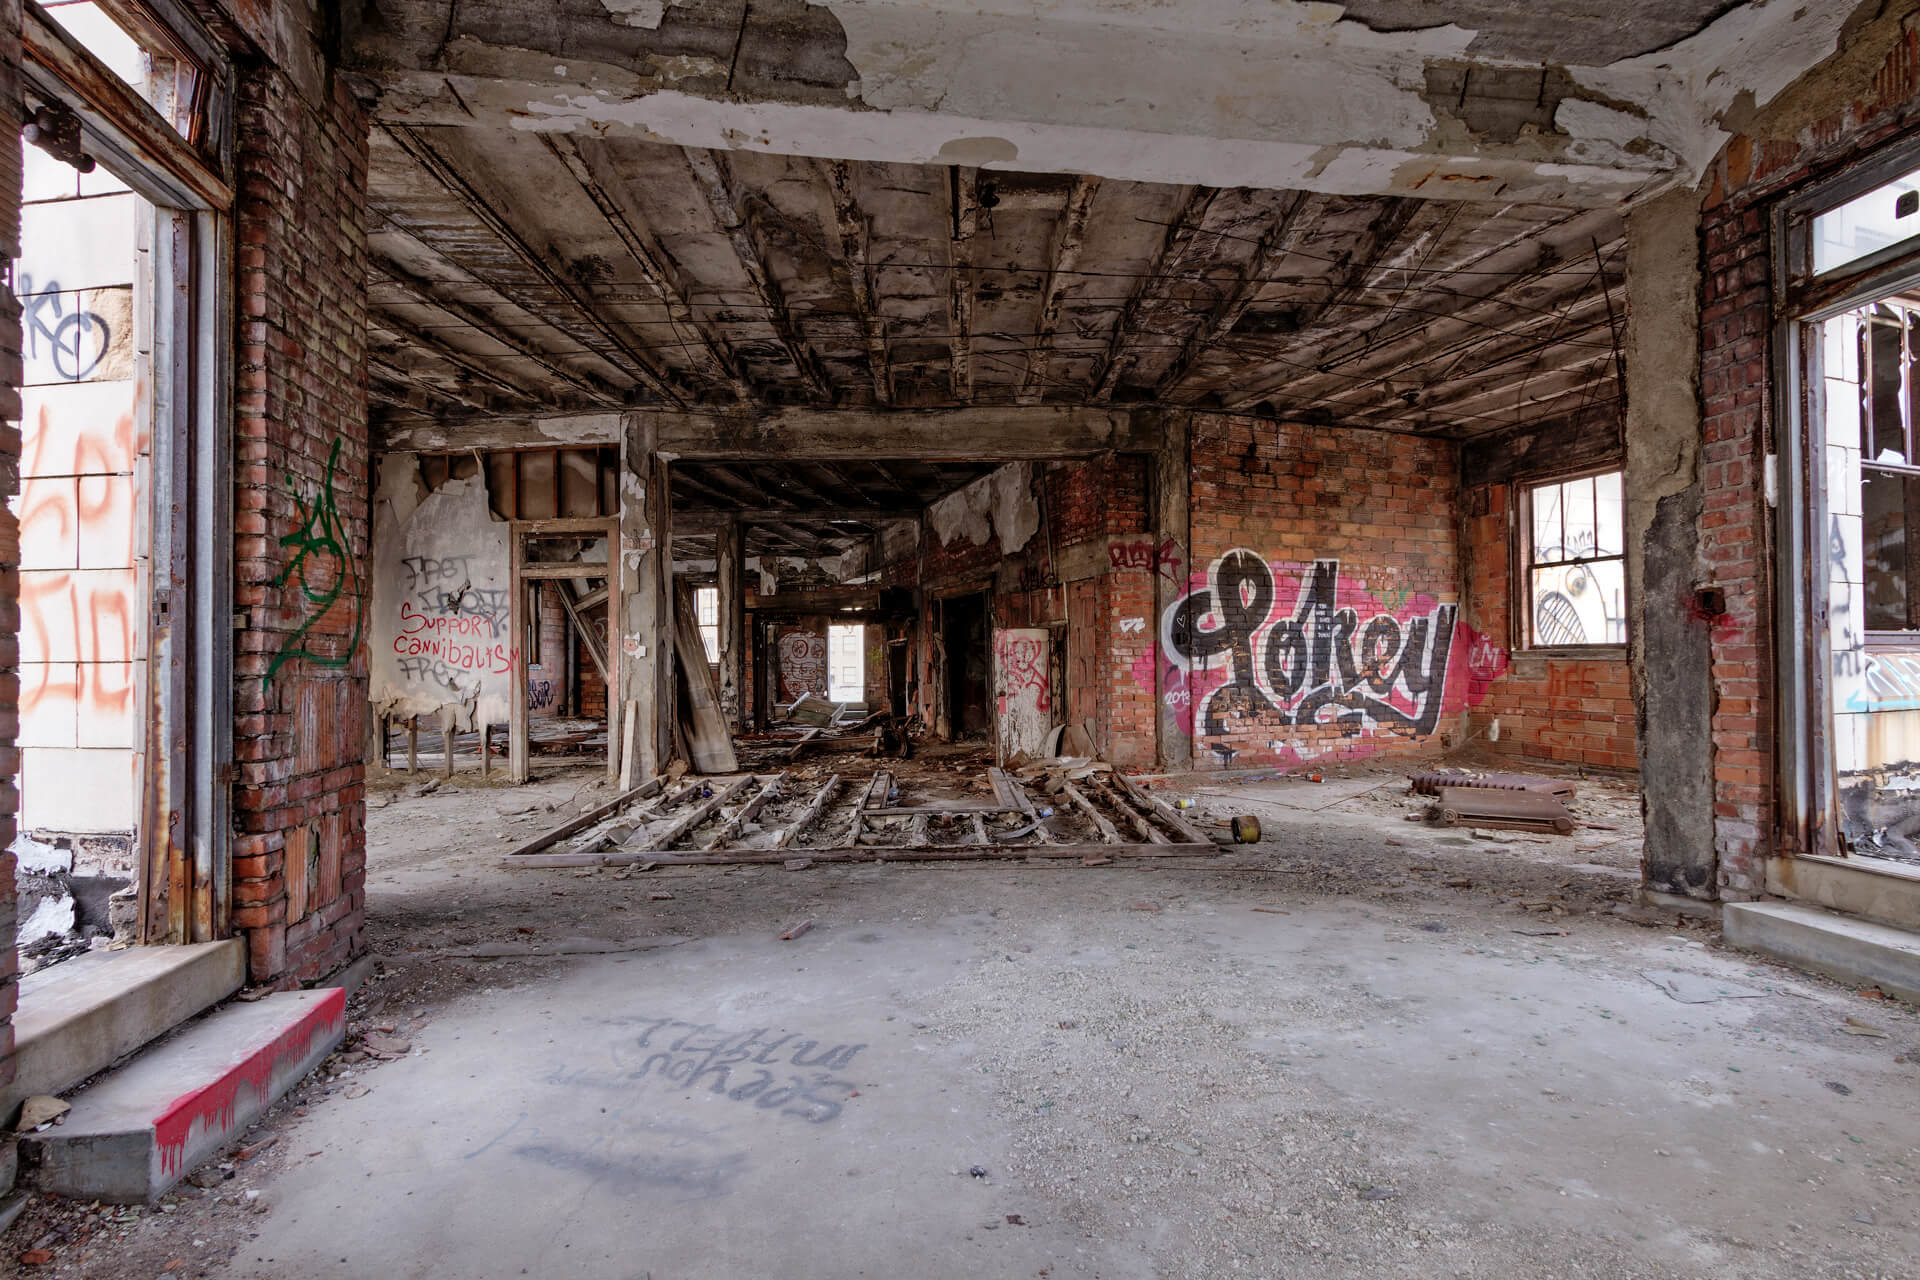 The Monarch Club before reconstruction has walls of rust and graffiti.